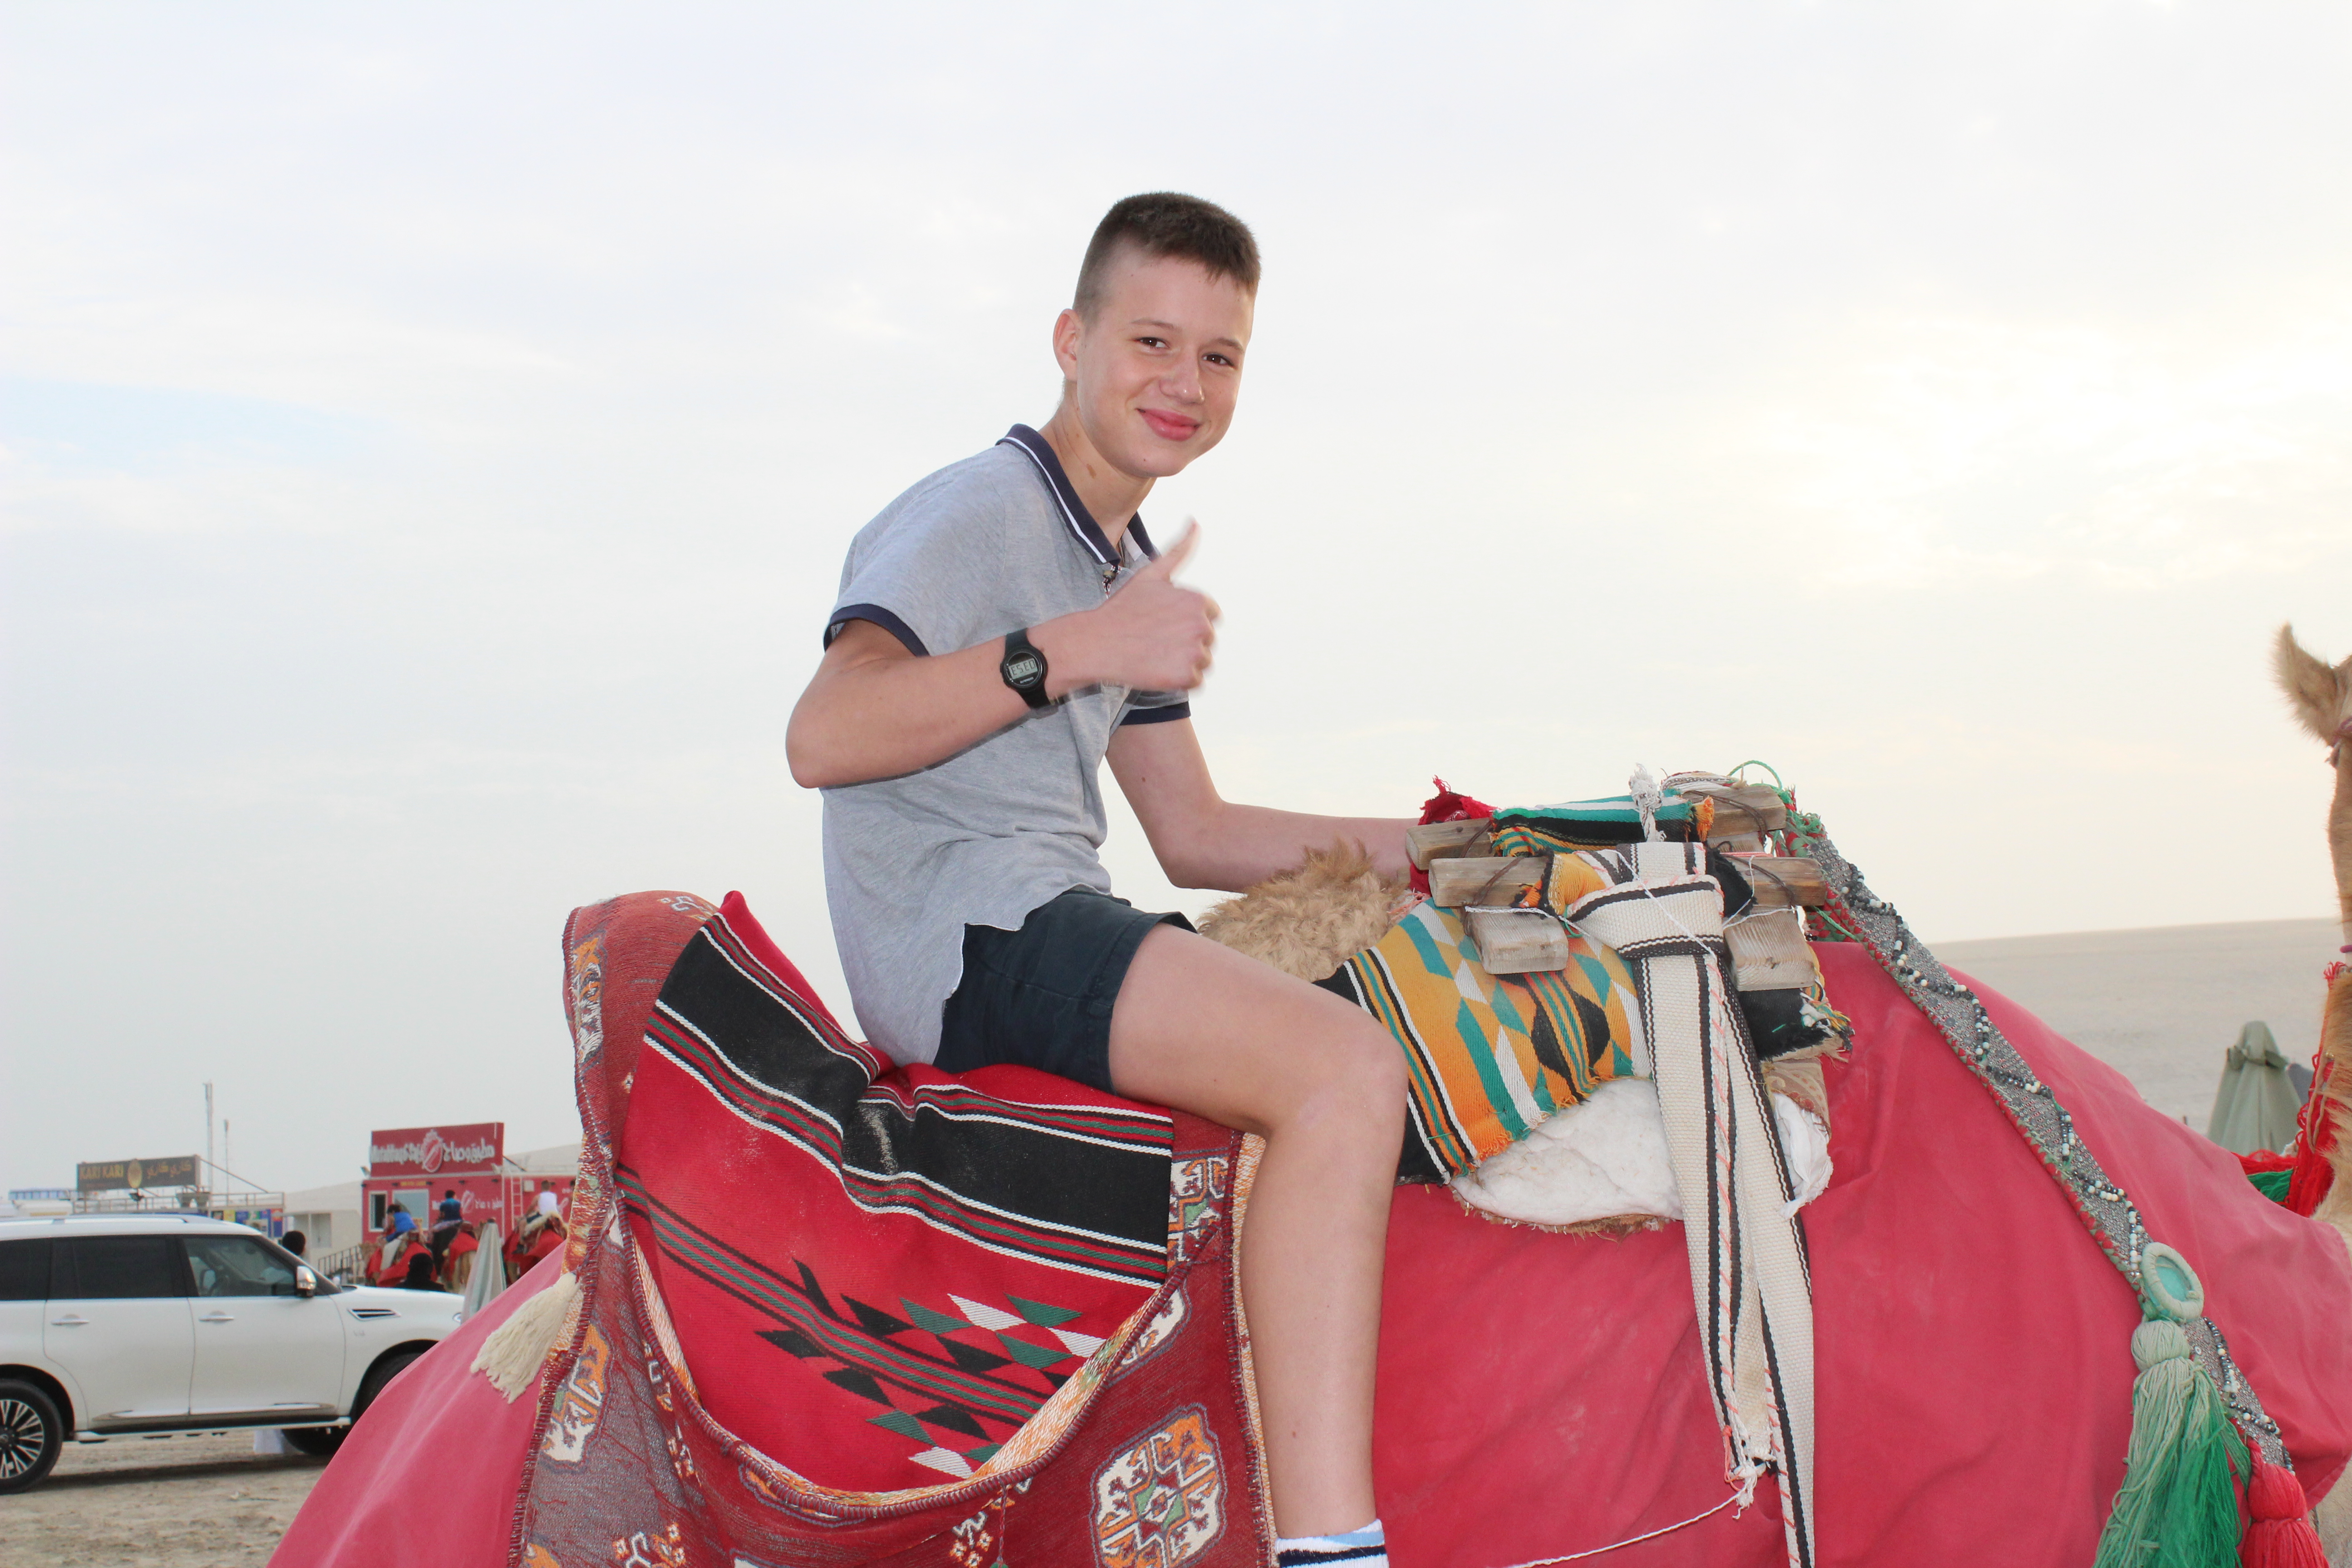 student giving thumbs up while riding camel